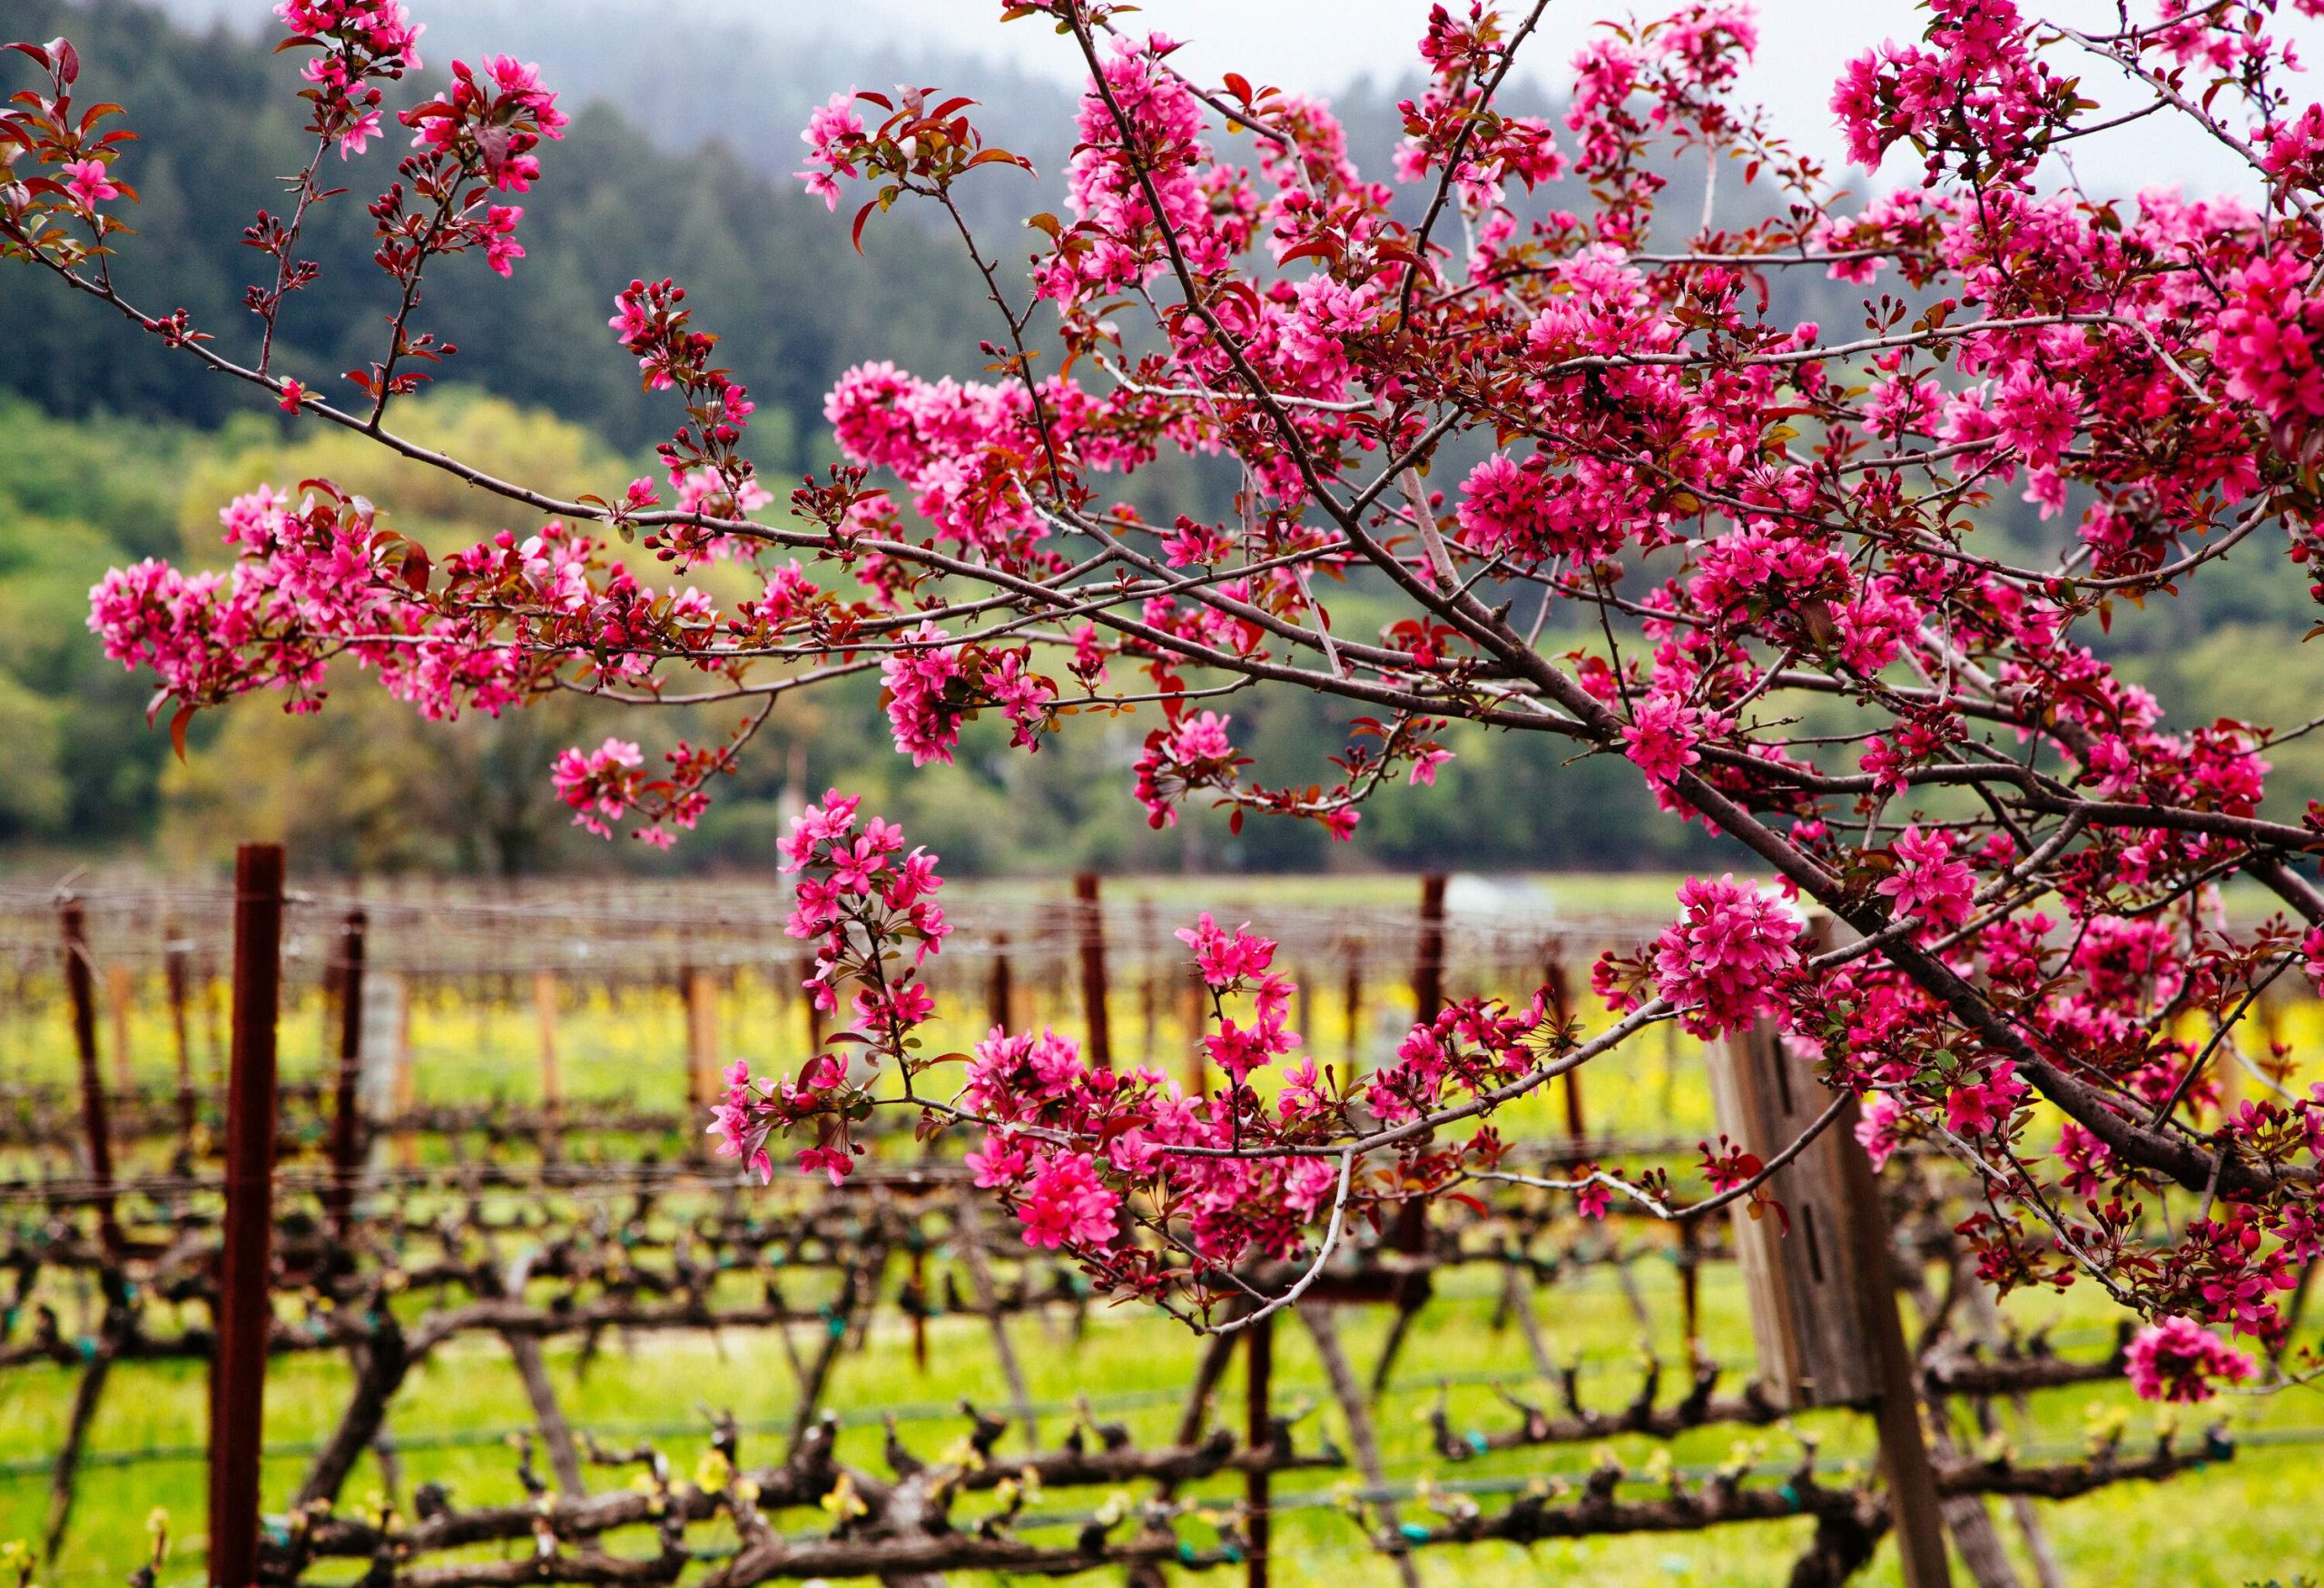 A branch of a pink cherry blossom tree against the backdrop of a vineyard.